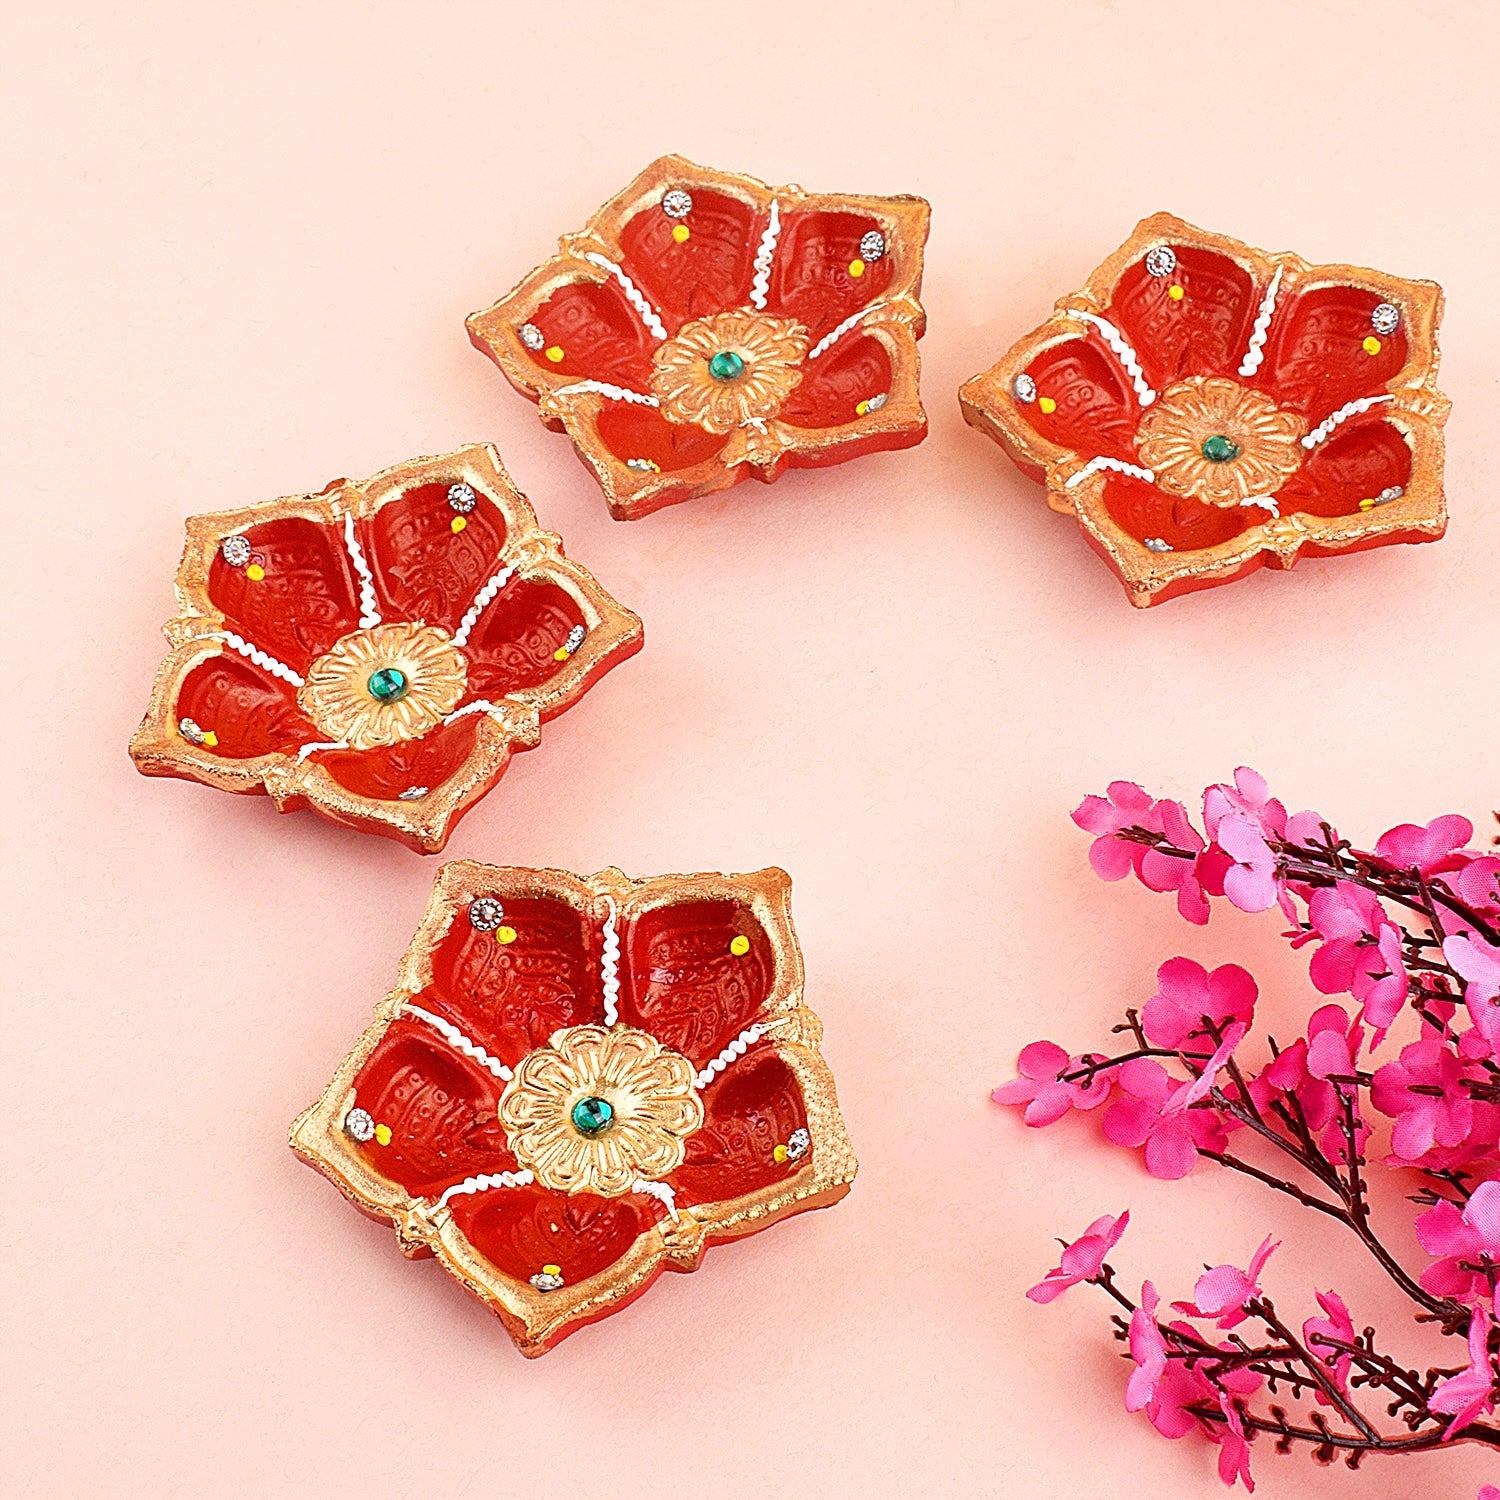 Crafting Exquisite Flower-Shaped Clay Diyas